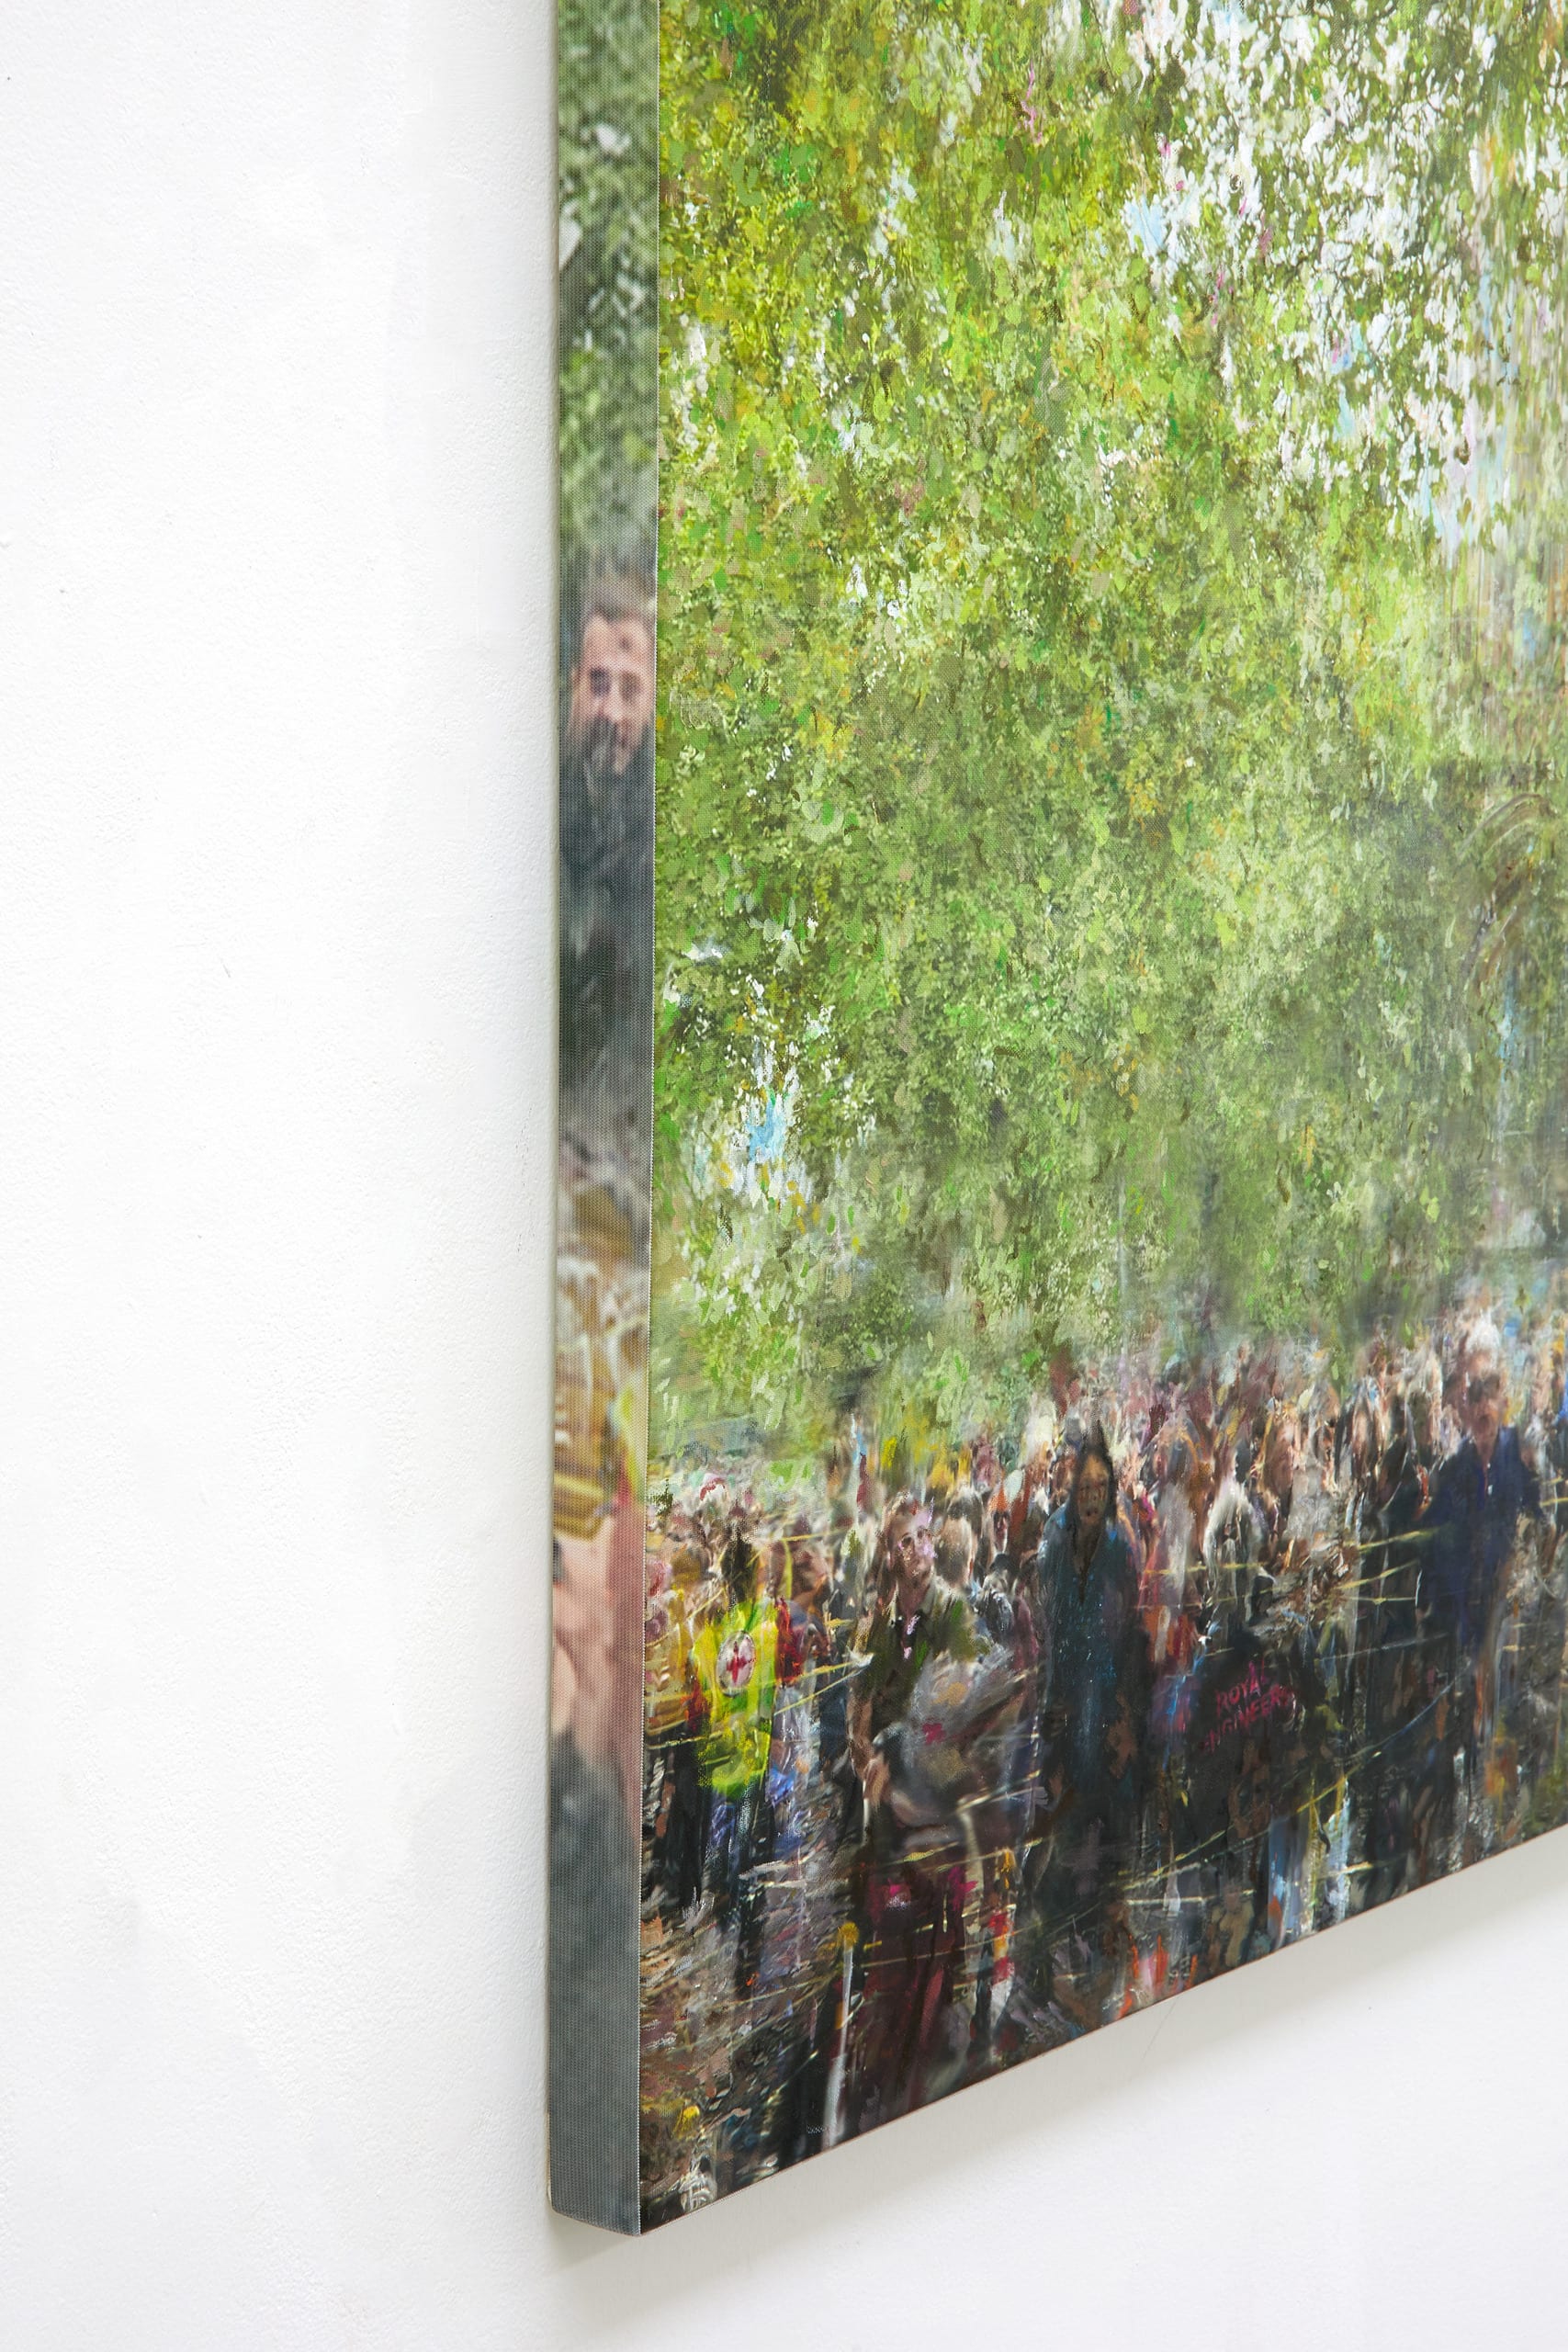 A distorted image of crowds of people under a layer of green trees, digital collage of photographic material.